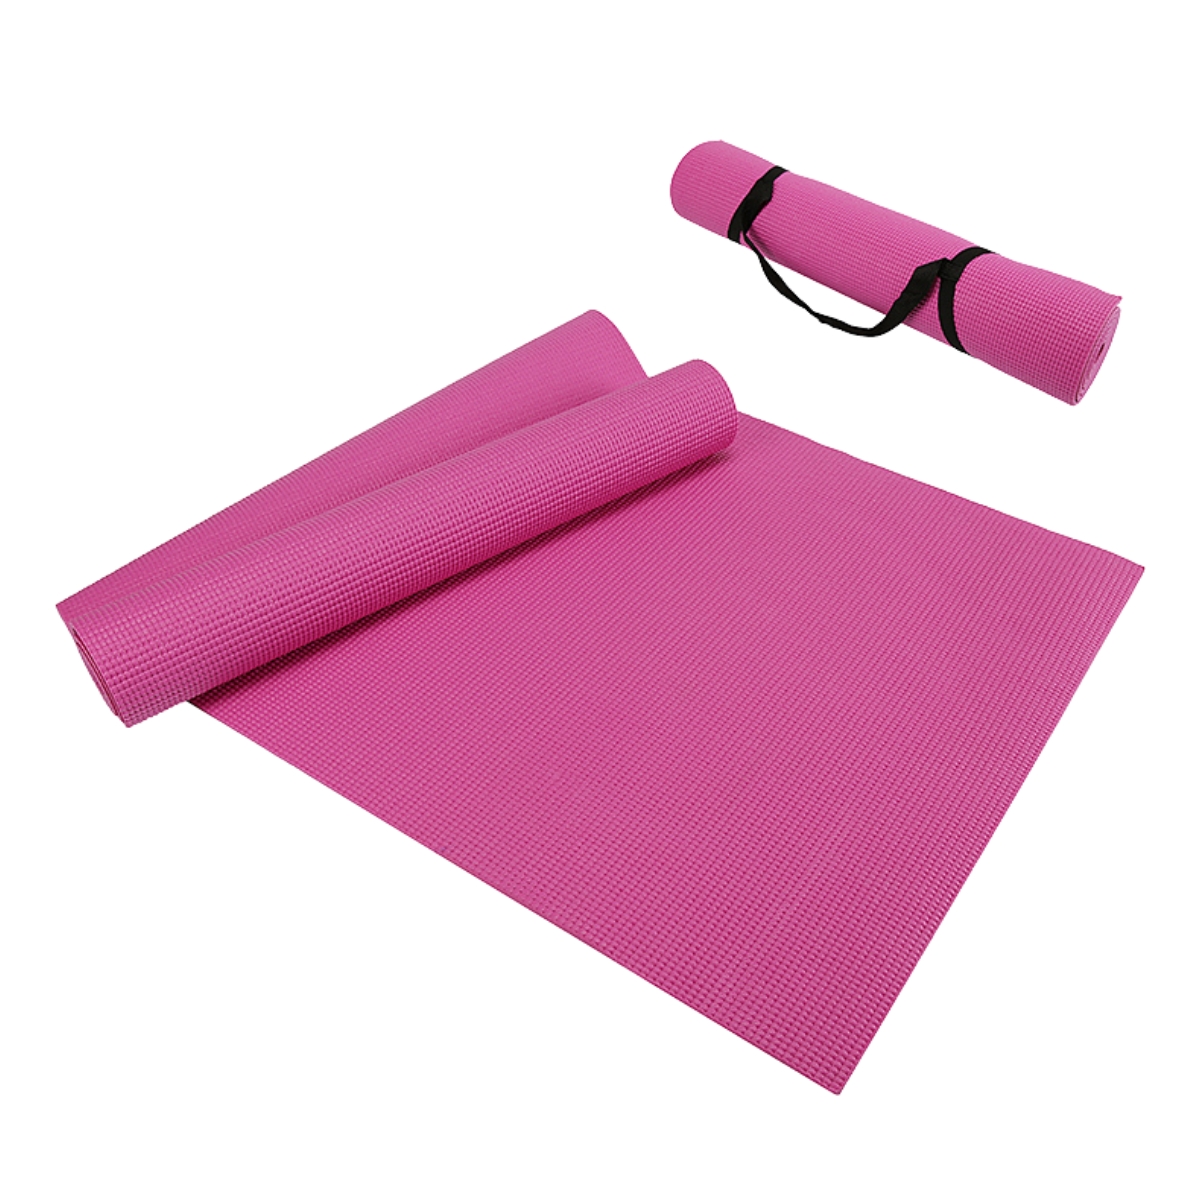 Picture of JupiterGear JG-YOGAMAT2-PNK Performance Yoga Mat with Carrying Straps